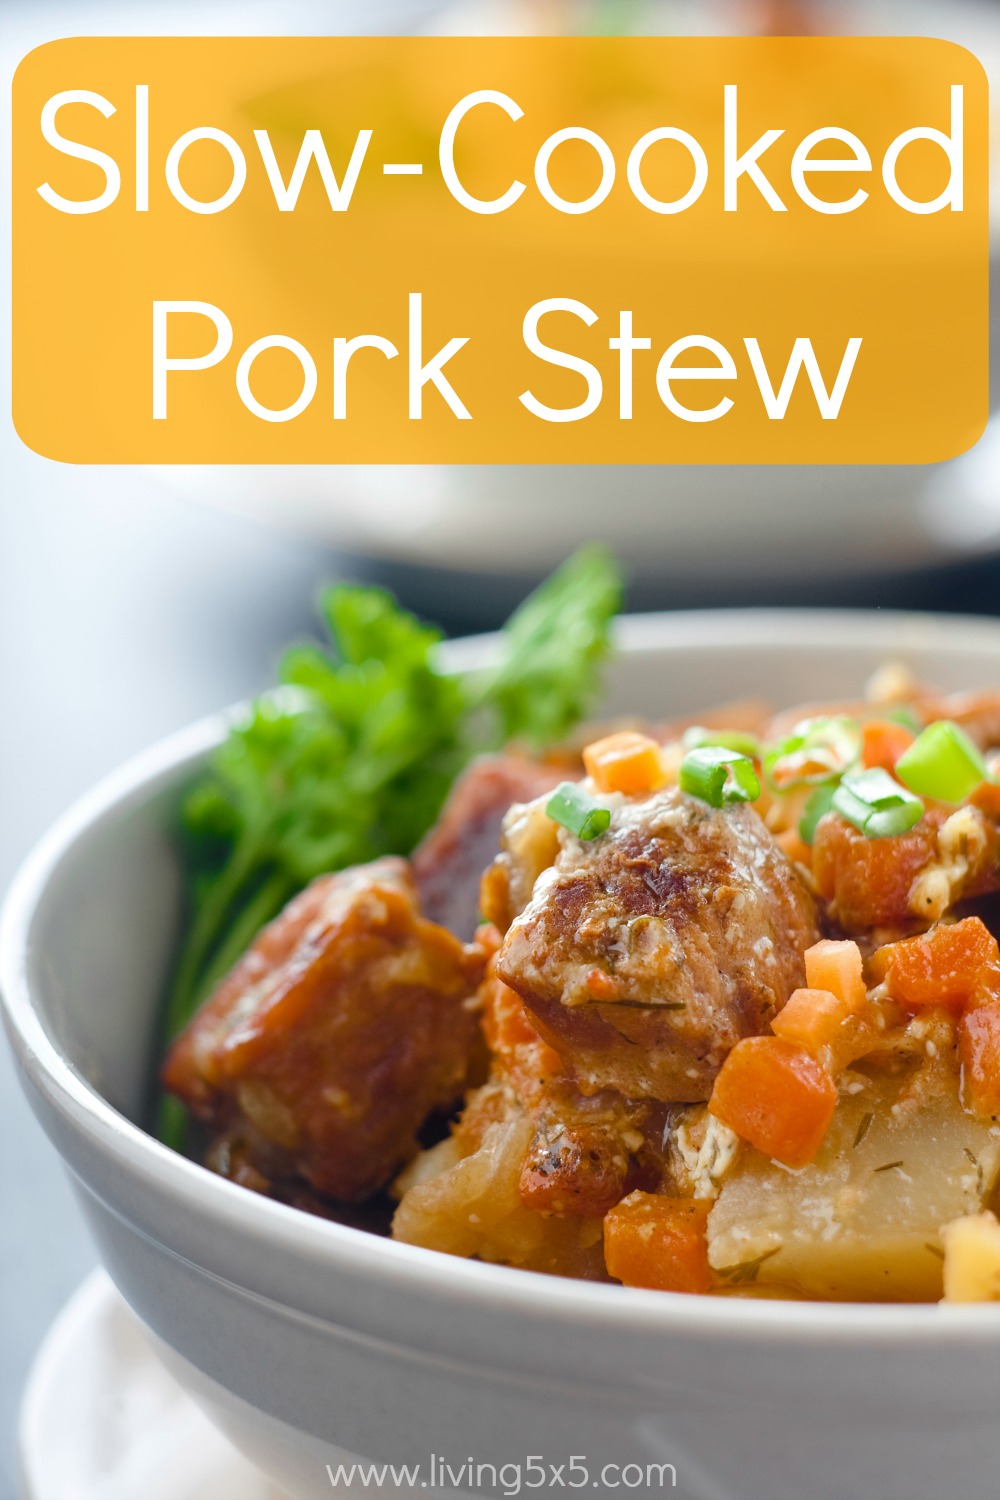 Today's post is something that can benefit everyone, a quick and easy slow-cooked pork stew recipe. Great for leftovers and lunch throughout the week! 